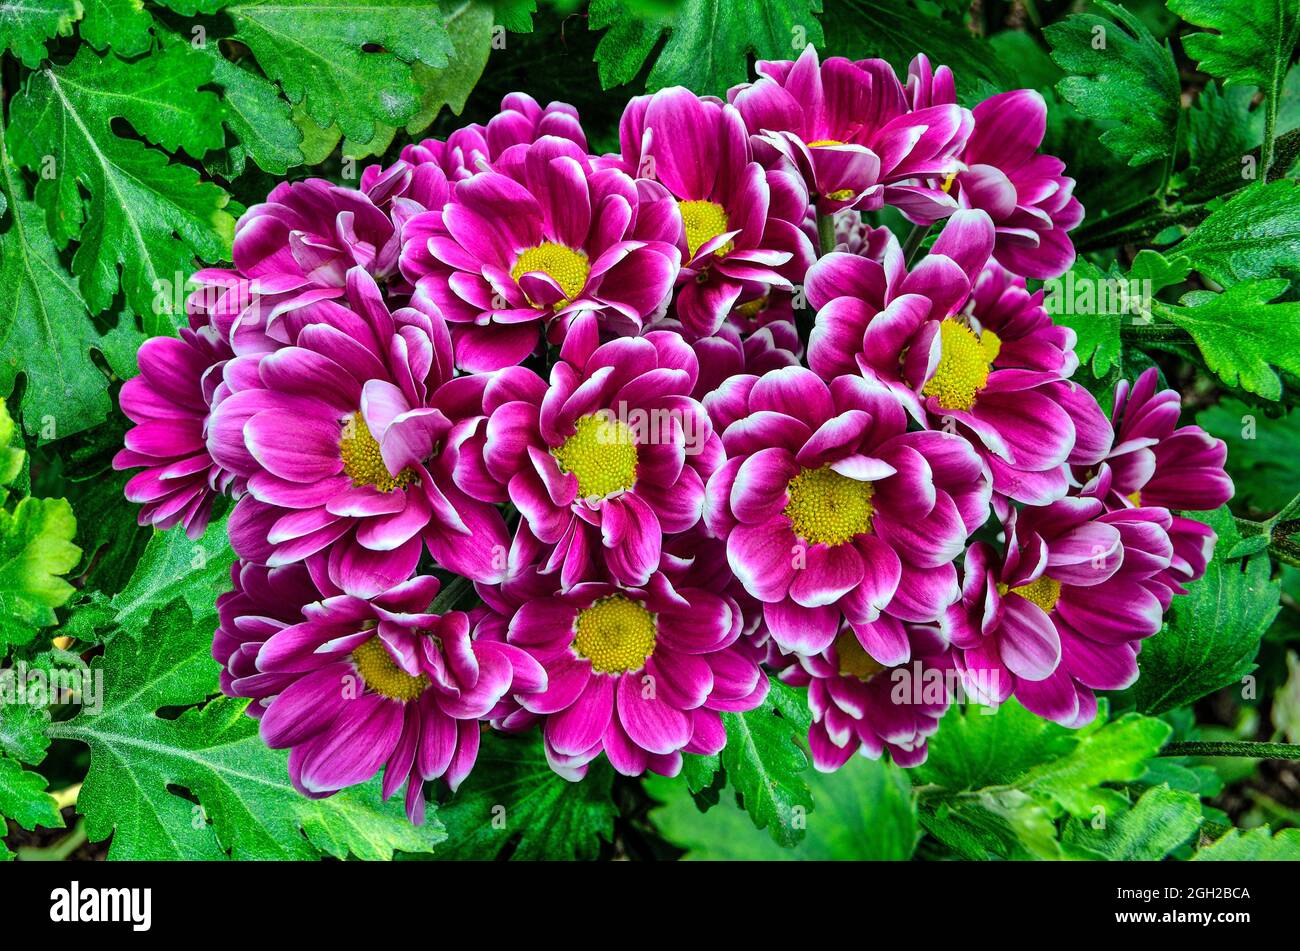 Purple white Chrysanthemum bush variety Haydar in autumn garden. Flowers with yellow centers and white tips on petals with leaves. Fall floral backgro Stock Photo